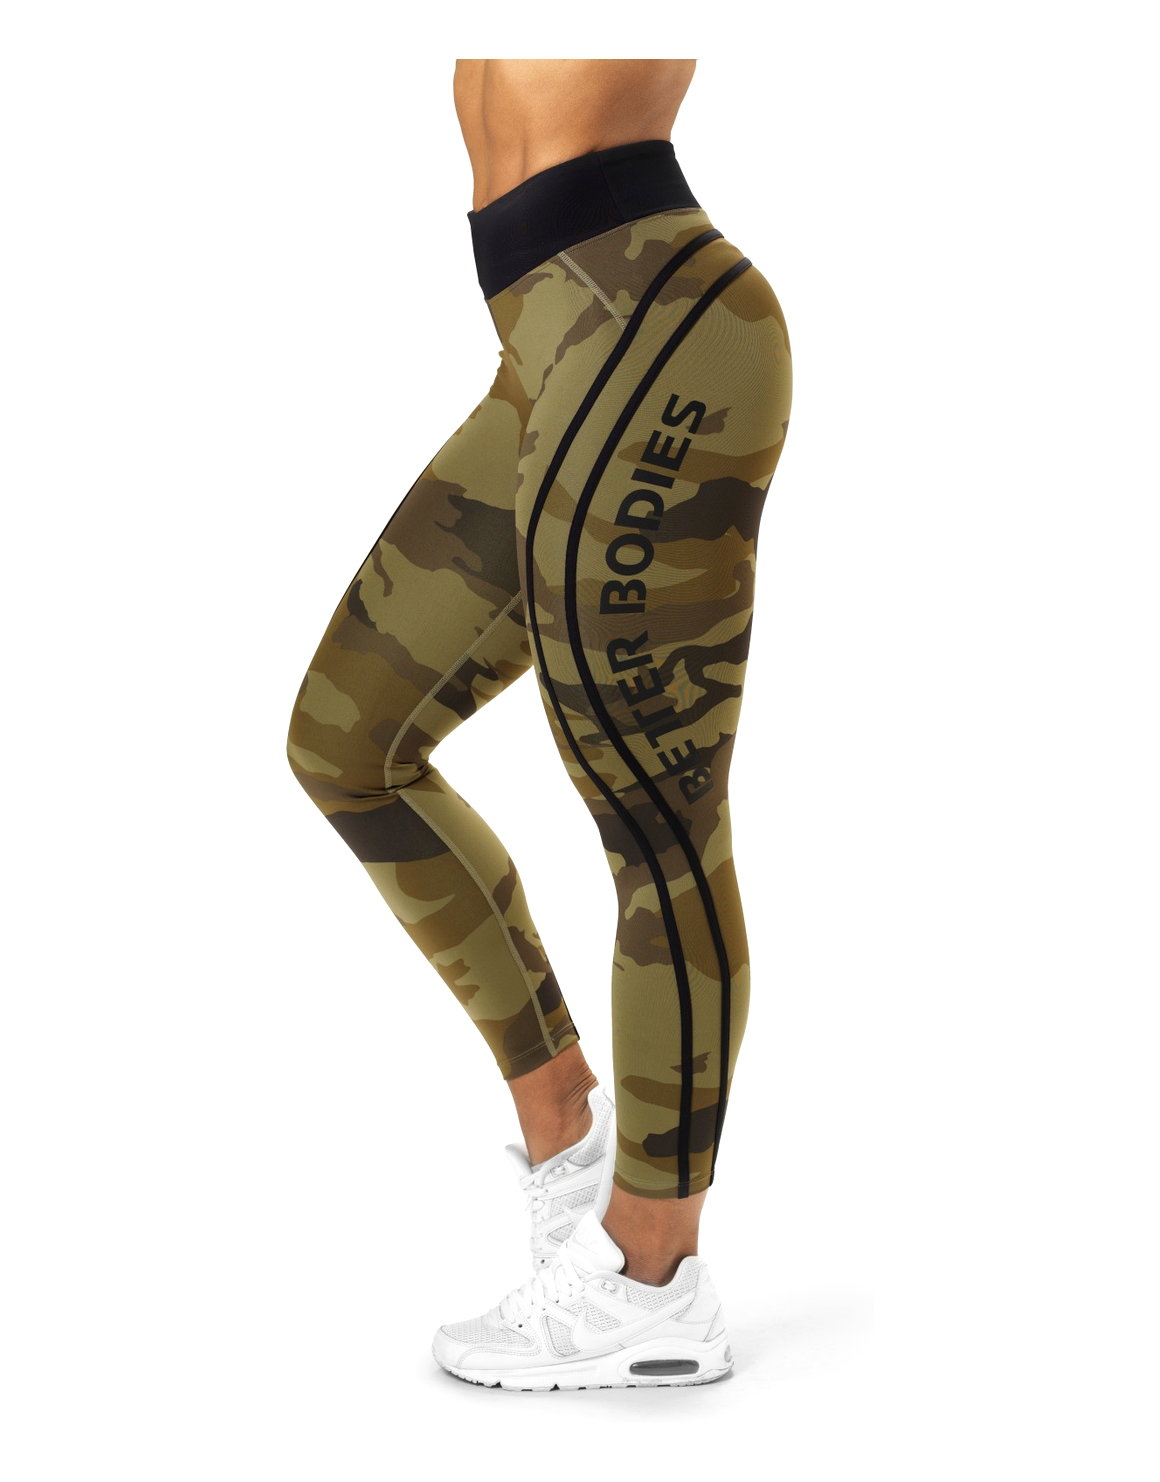 Camo High Tights by Better bodies, Colour: Green Camo 